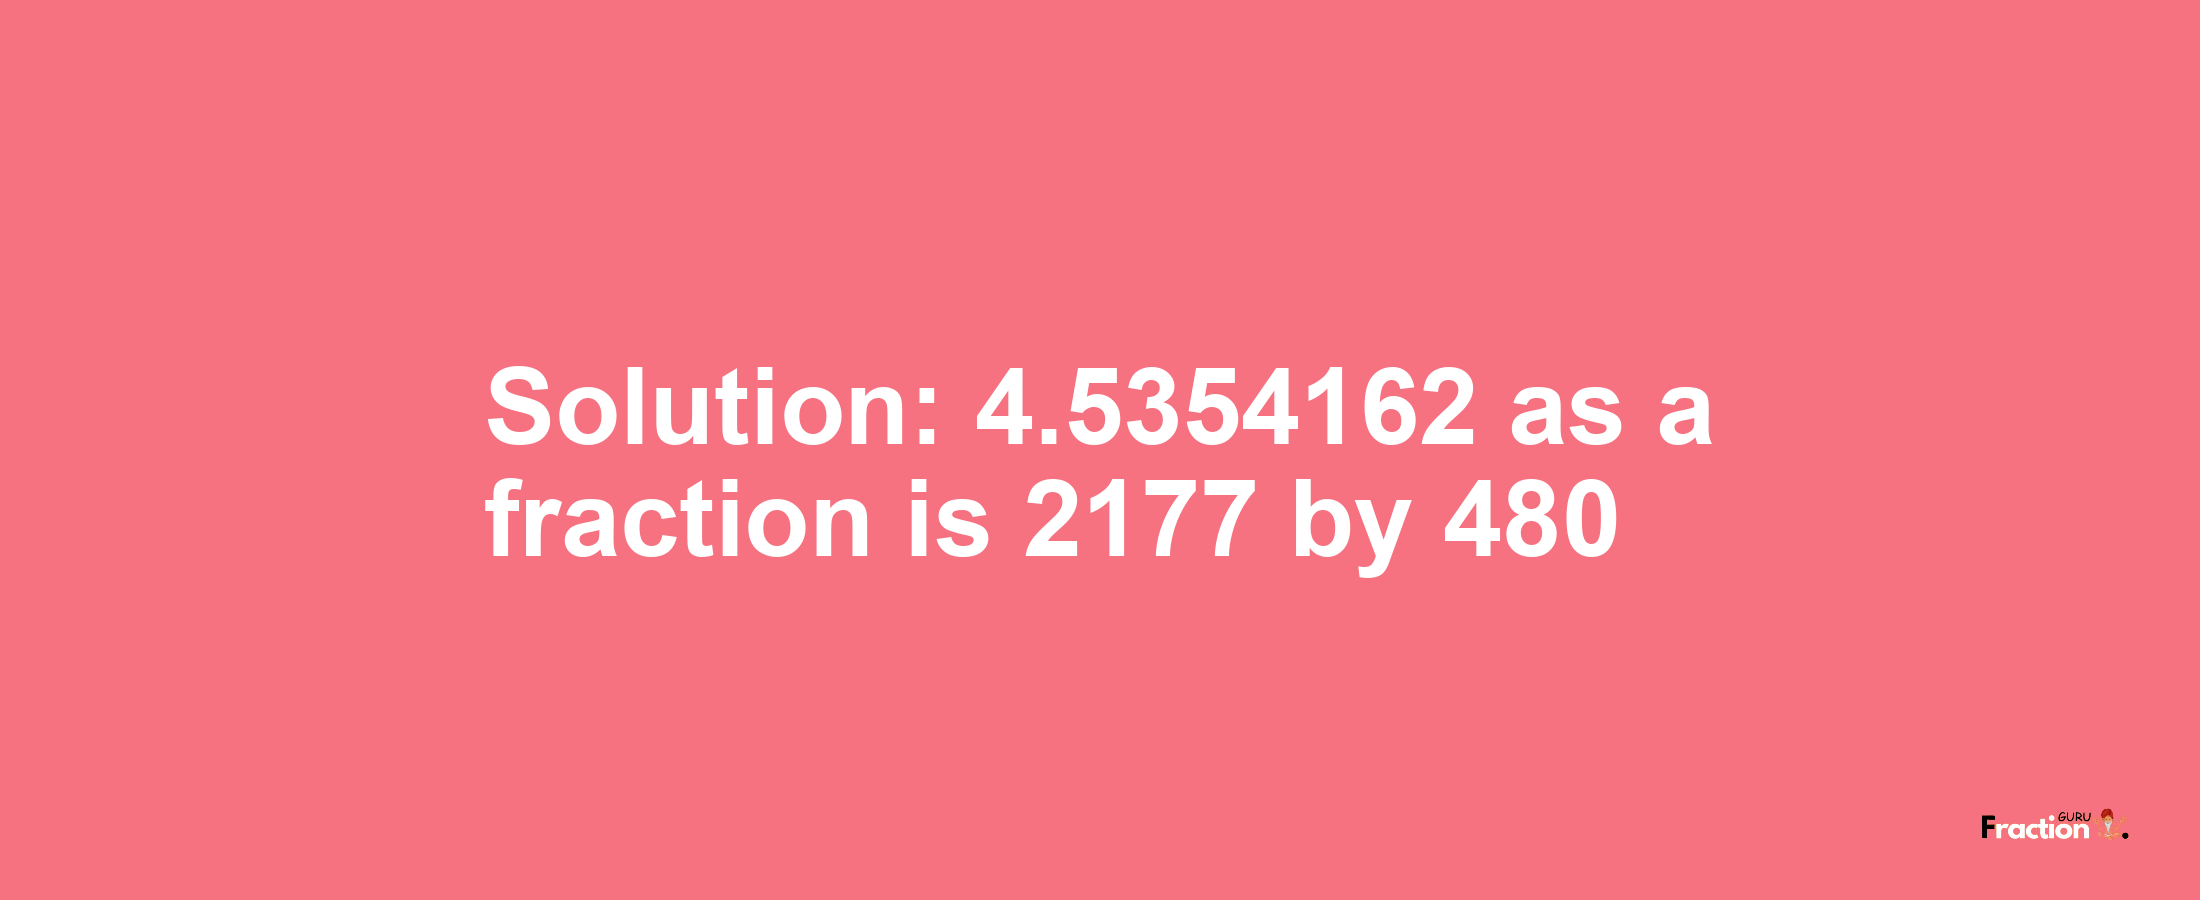 Solution:4.5354162 as a fraction is 2177/480